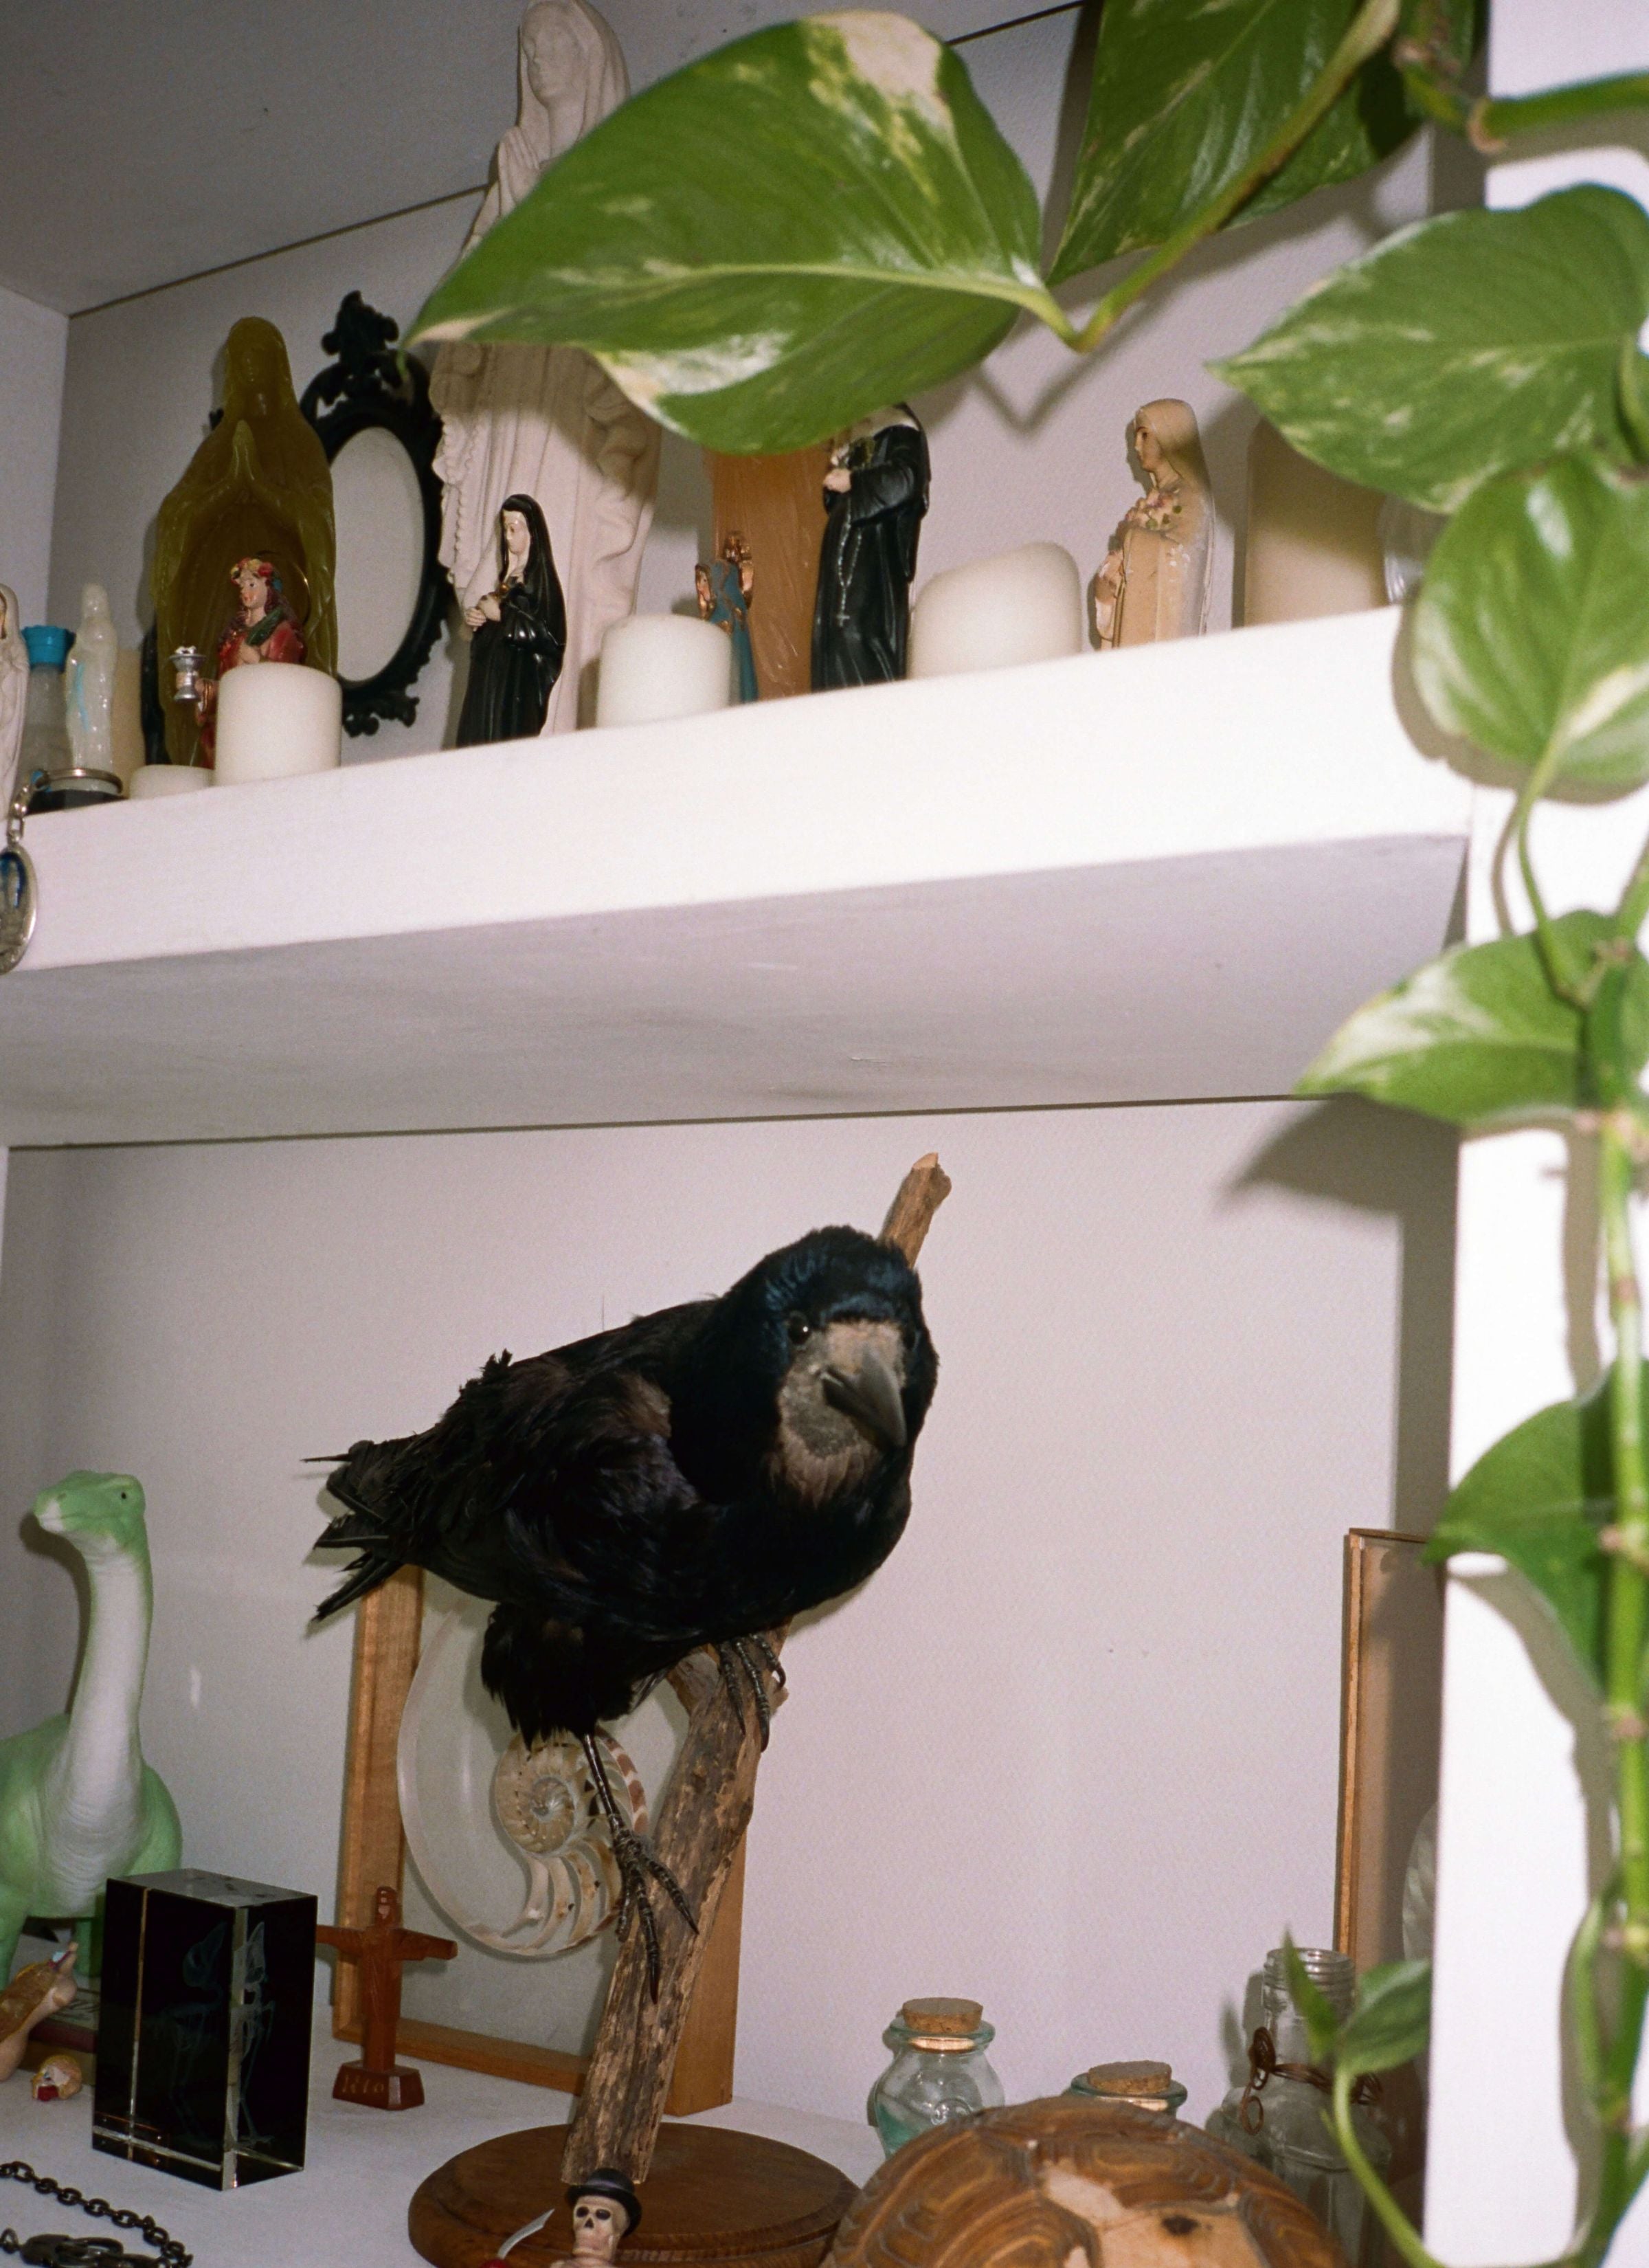 A close-up view of an angel figurine on a shelf adorned with small religious statues and candles. Nearby stands a crow statue perched on a stick, adding a touch of mystique. Vines from a plant cascade down from above, enhancing the ethereal atmosphere. This scene evokes a sense of spiritual reverence and natural beauty, with elements of symbolism and tranquility.